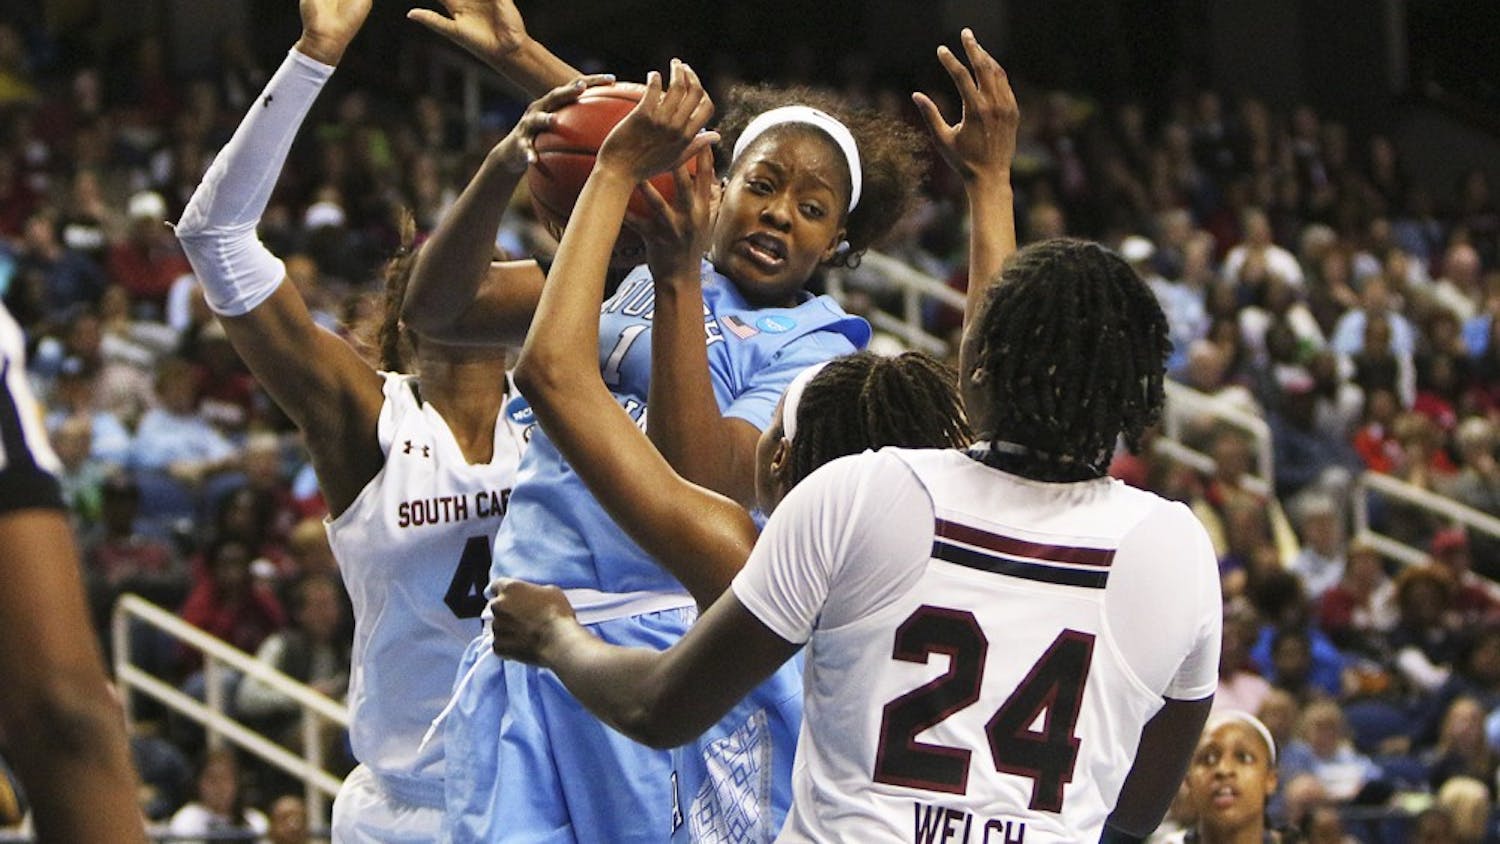 The UNC women’s basketball team lost 67-65 to South Carolina in the Sweet 16 in Greensboro Friday. Stephanie Mavunga (1) led the Tar Heels with 13 rebounds.